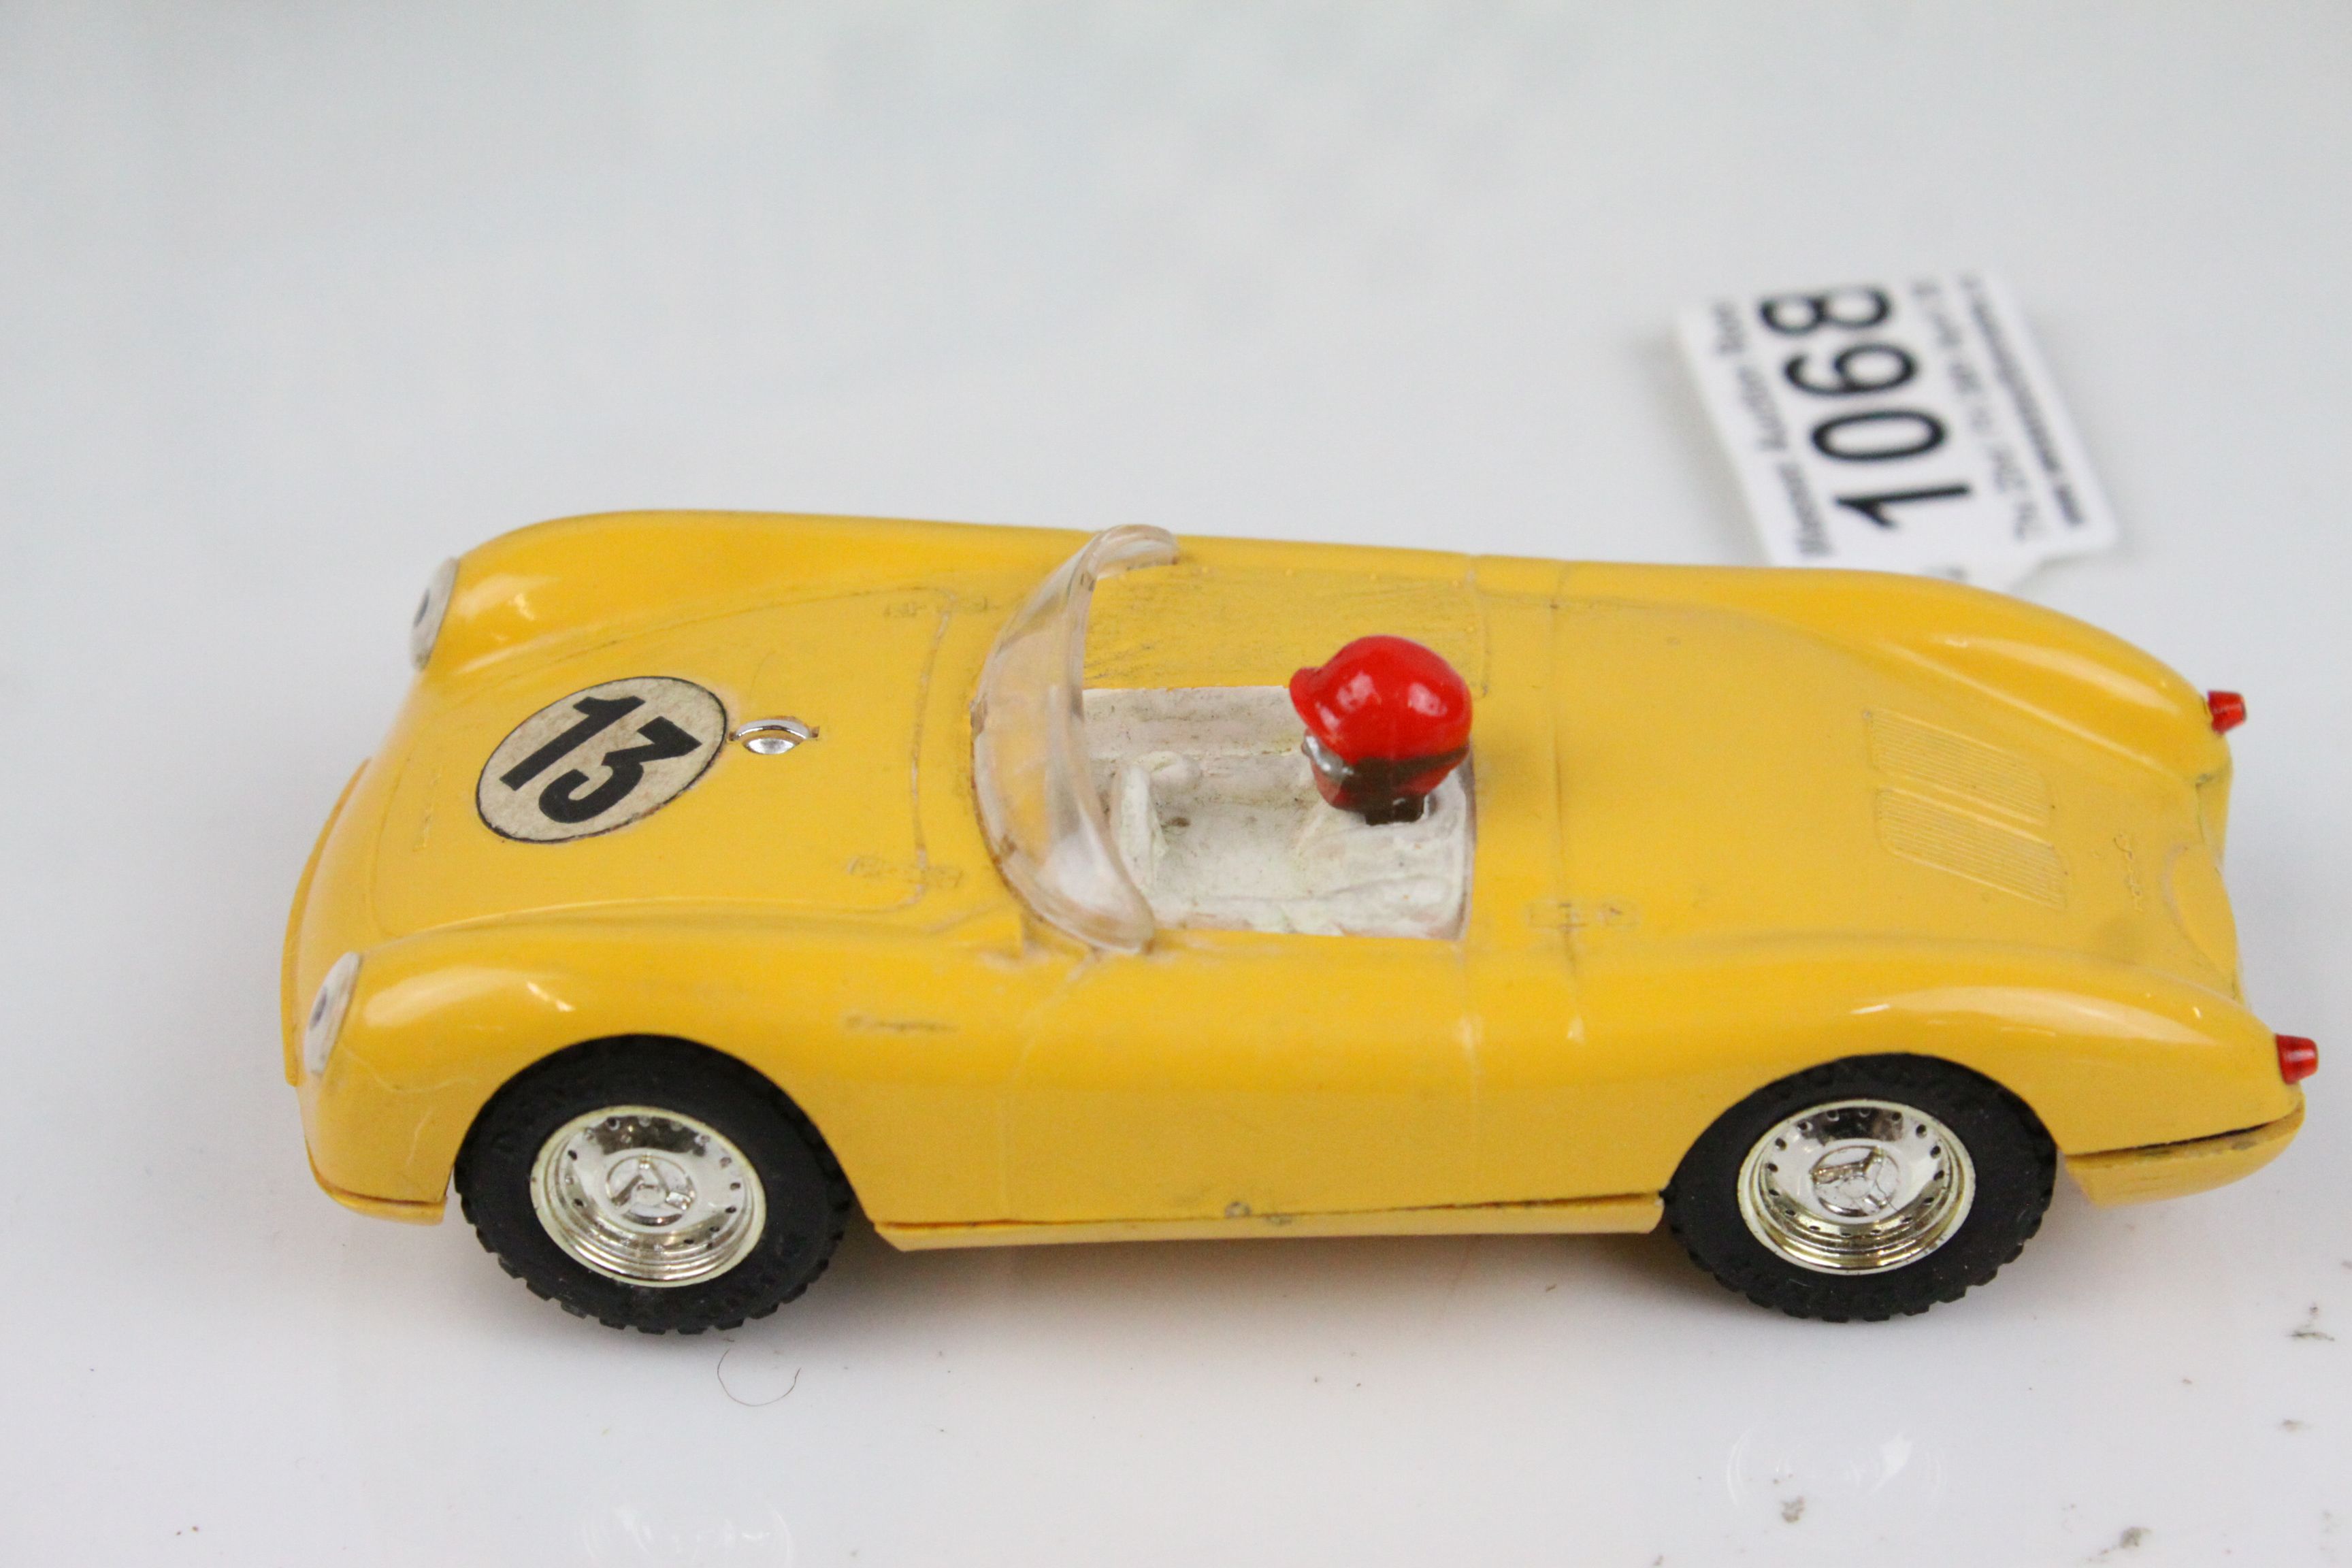 Boxed Triang Scalextric MM C61 Porsche slot car in yellow, driver with red helmet, race number 13, - Image 2 of 11